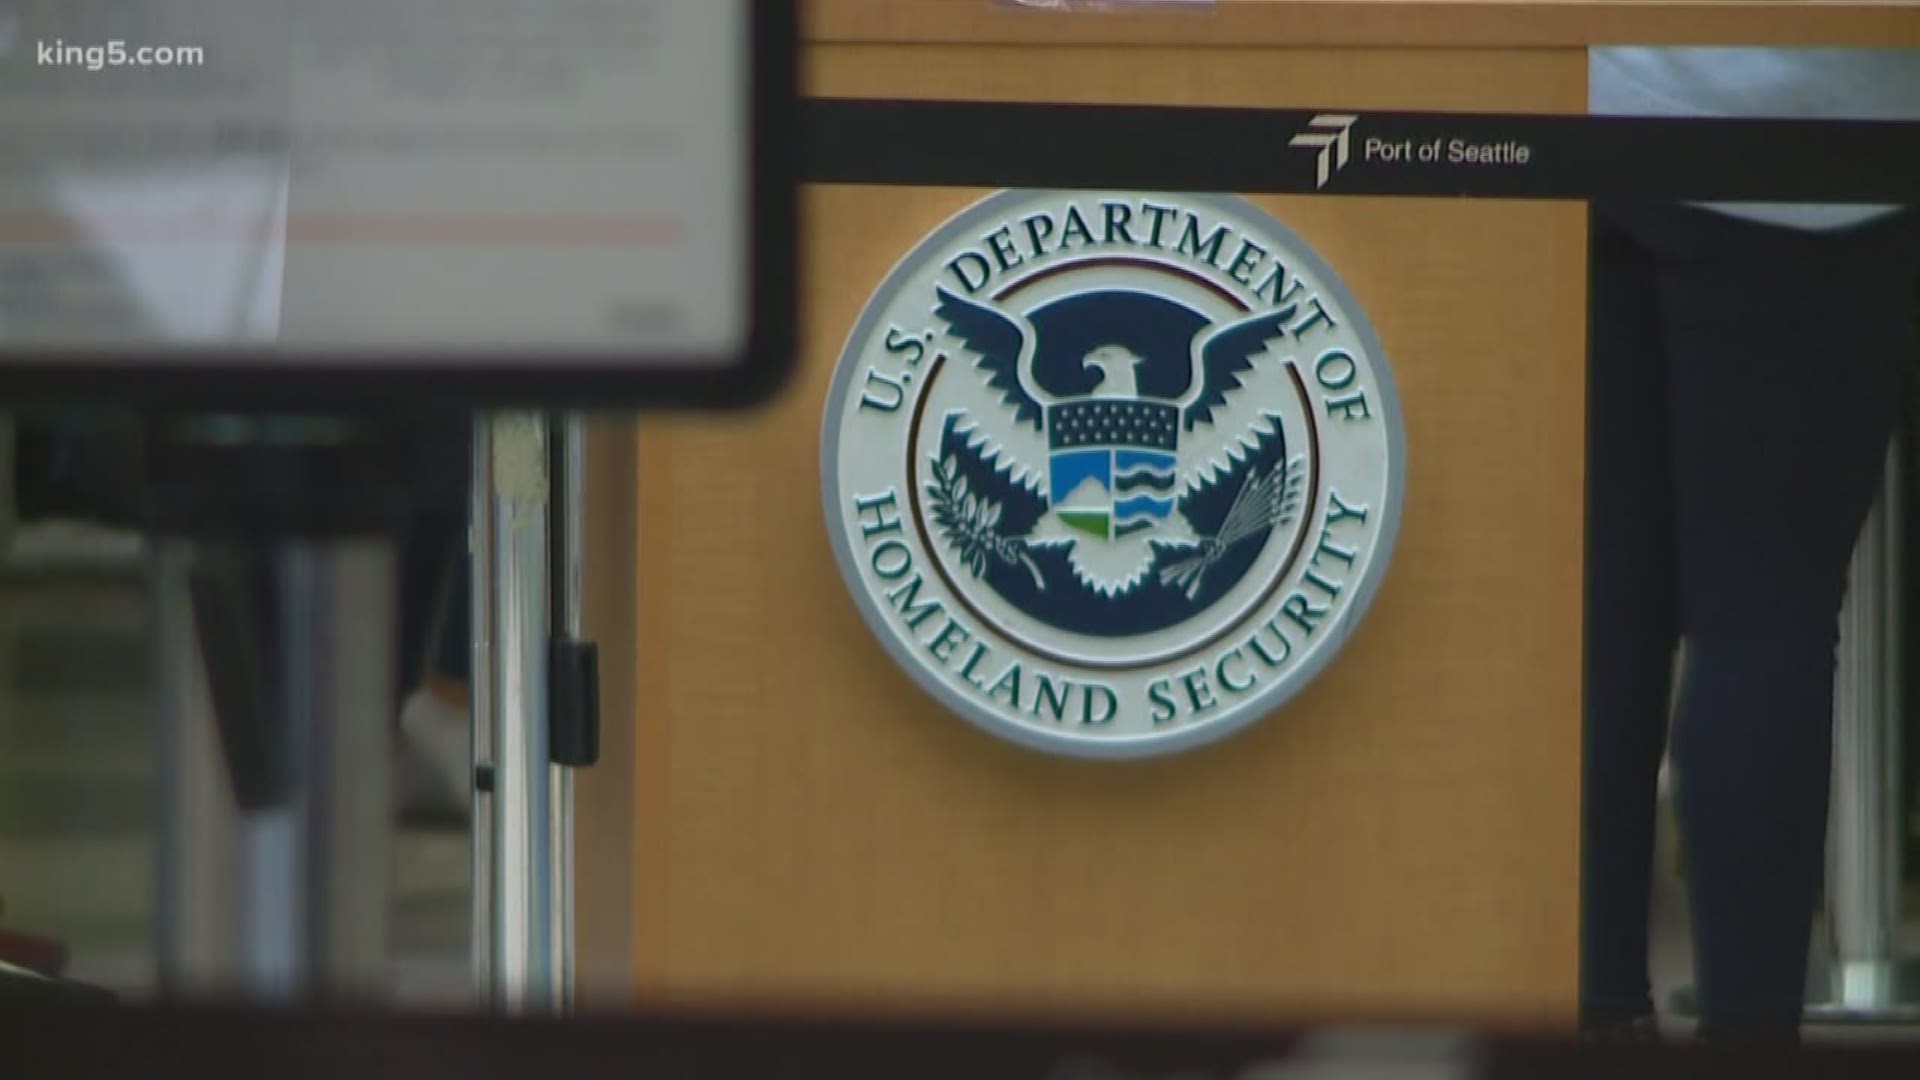 There are roughly 2,000 federal workers at SeaTac airport who are furloughed or working without pay. Some of them are turning to food stamps and loans, while negotiating with their landlords to give them a break on their rent. KING 5's Ted Land visited an event designed to connect those workers with help.